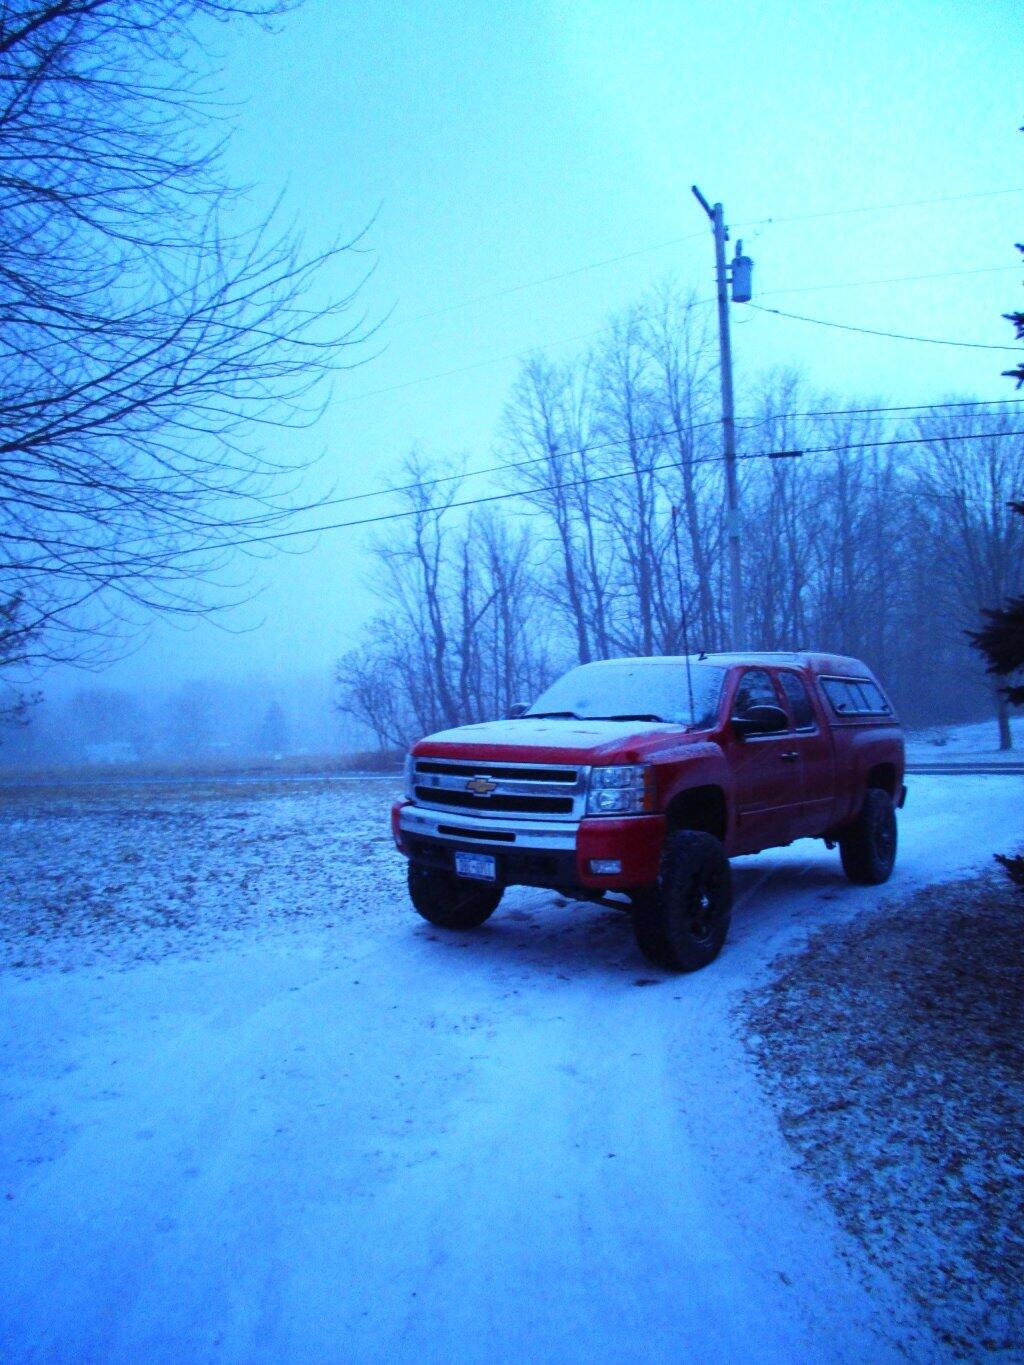  Snow Covered Big Red